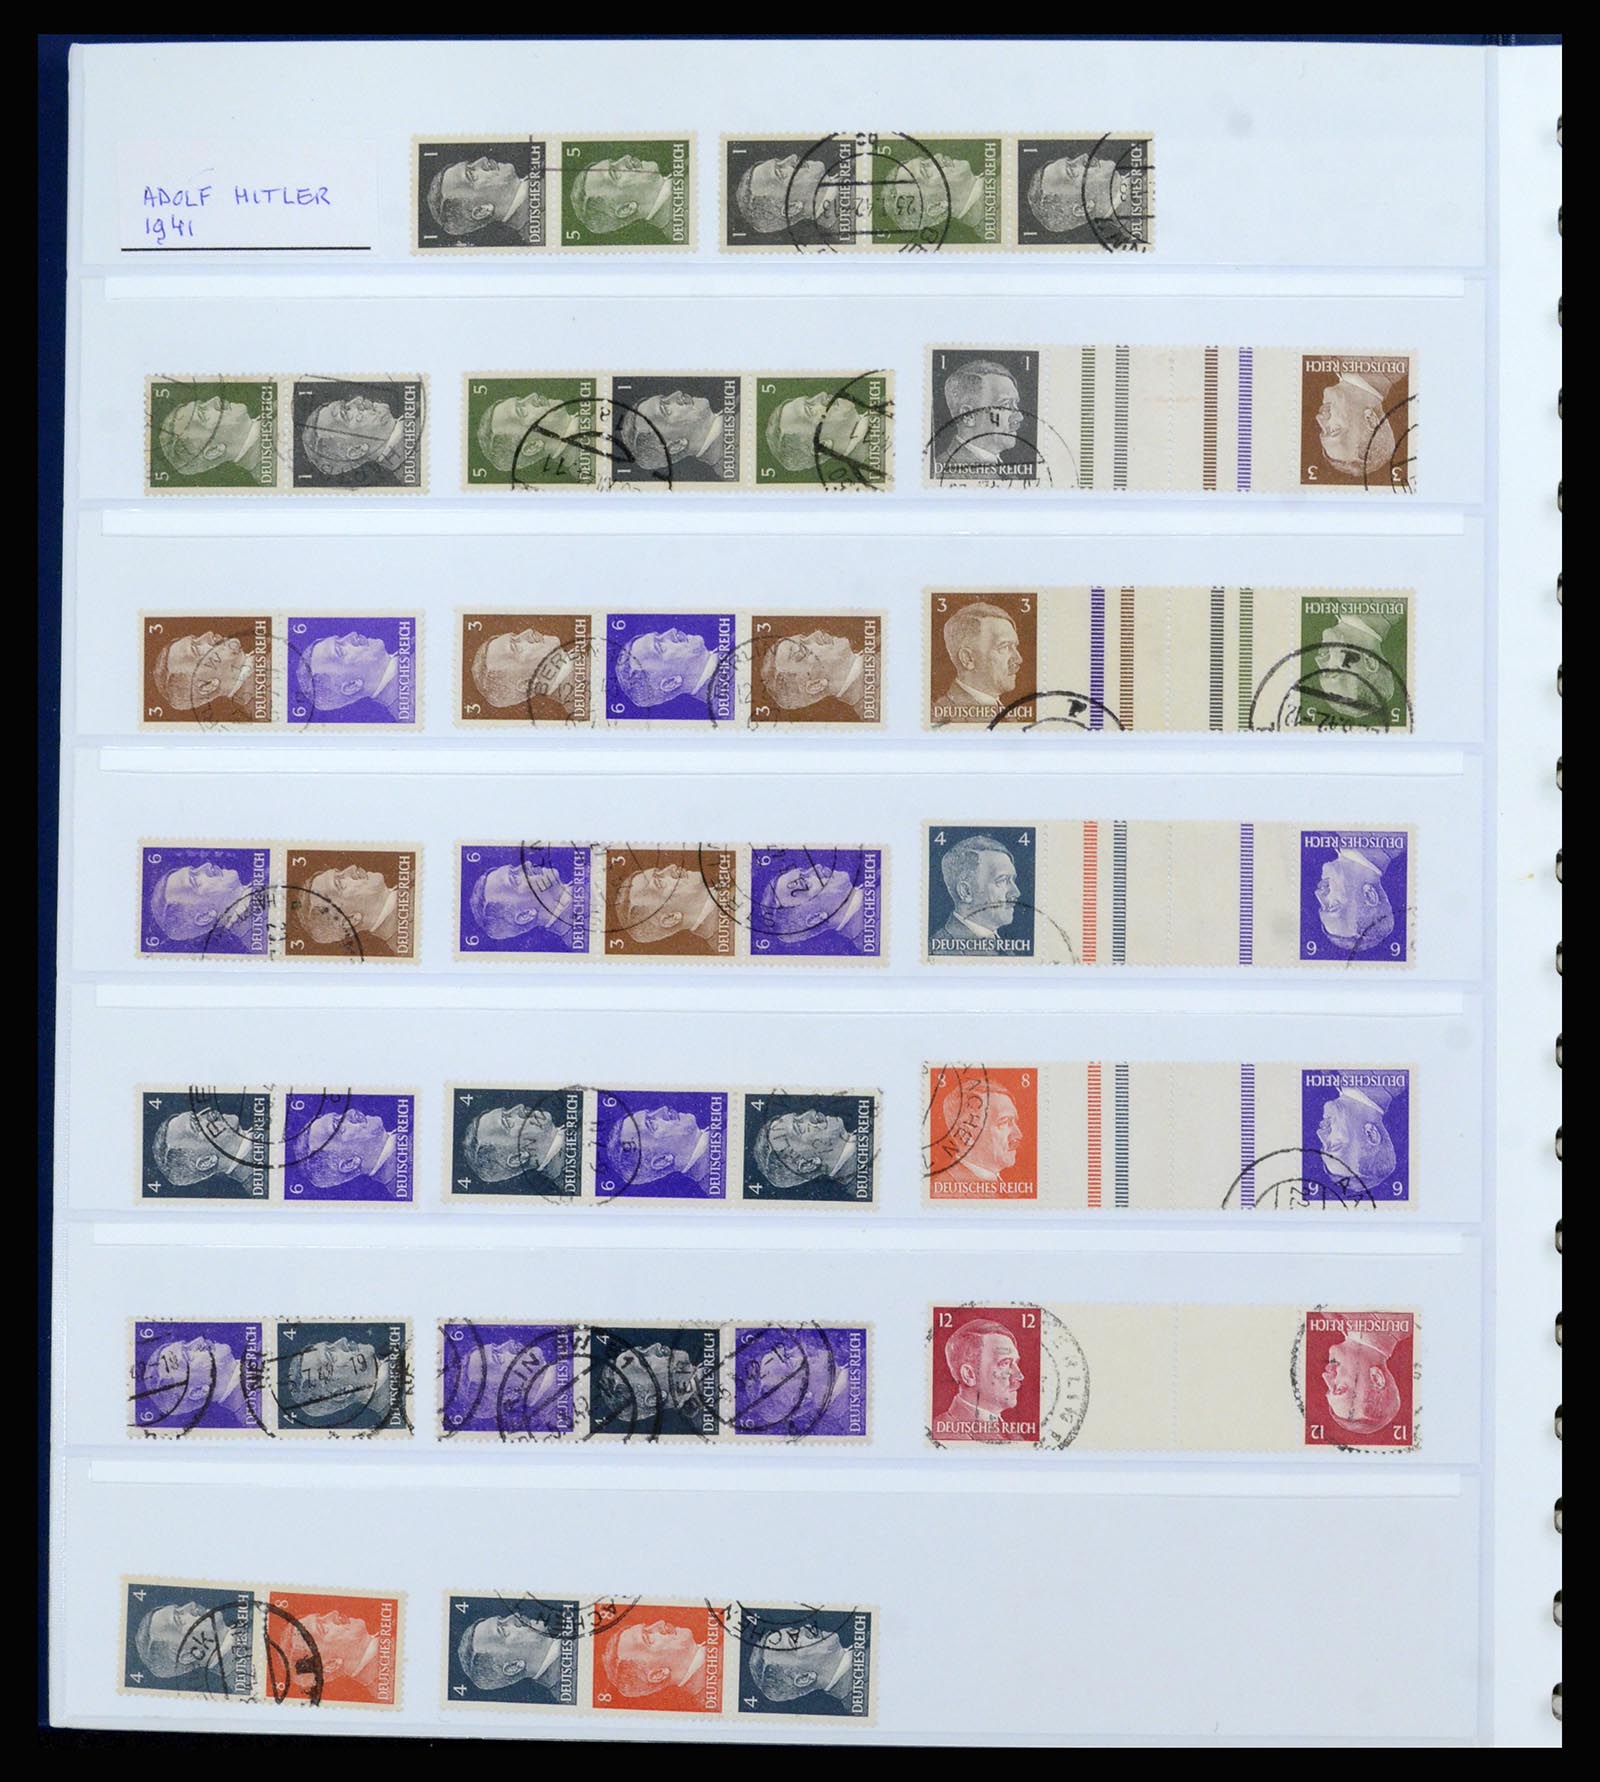 37190 024 - Stamp collection 37190 Germany combinations 1912-1991.